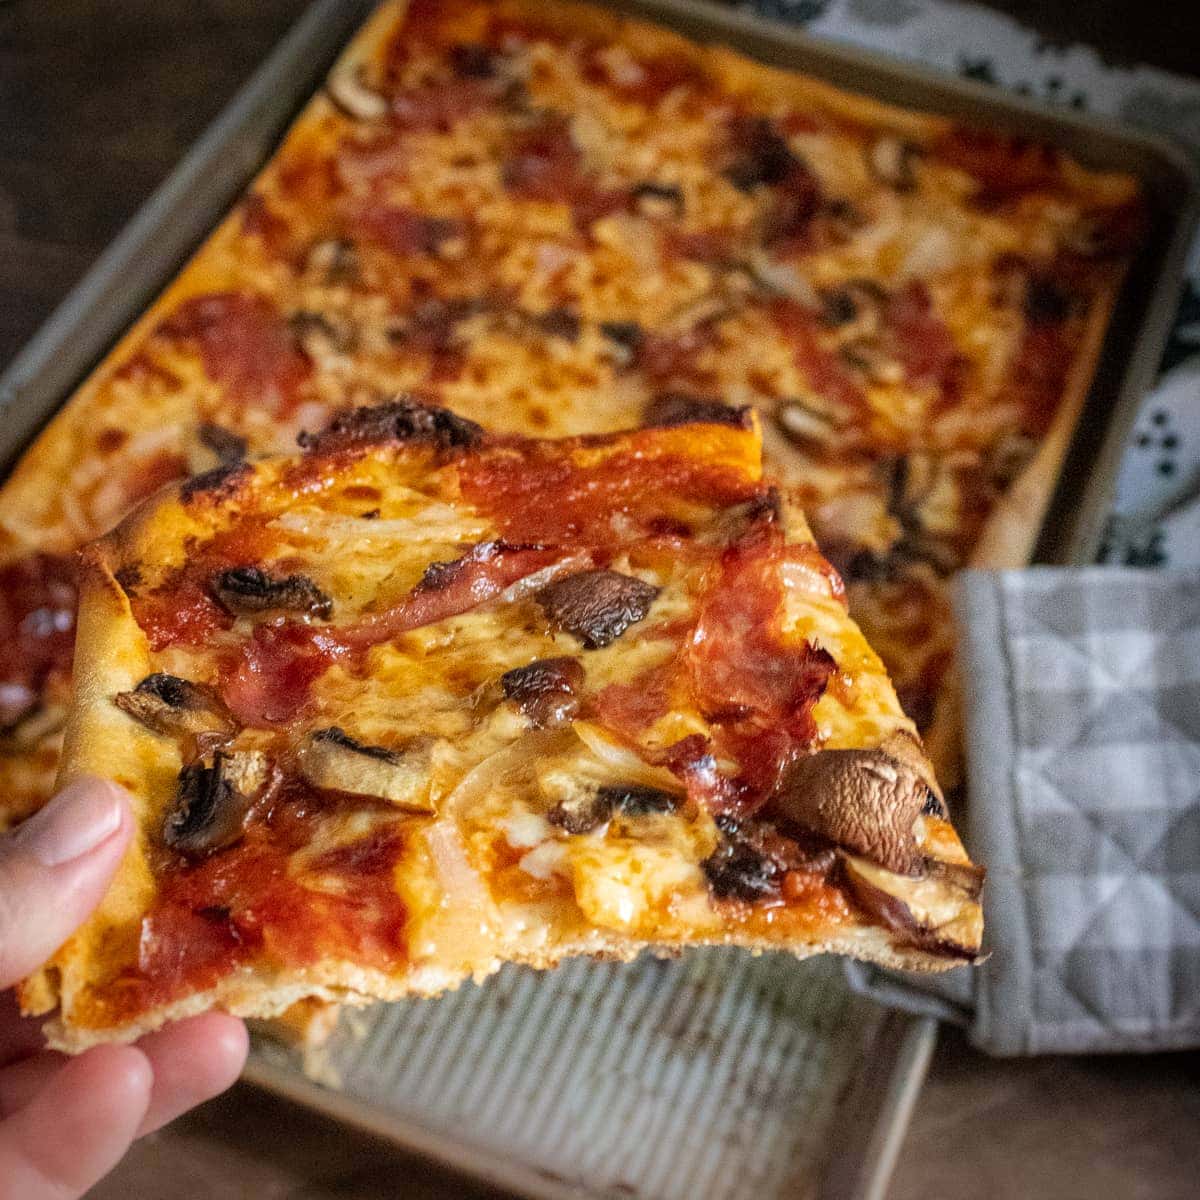 a slice of homemade pizza held in a hand